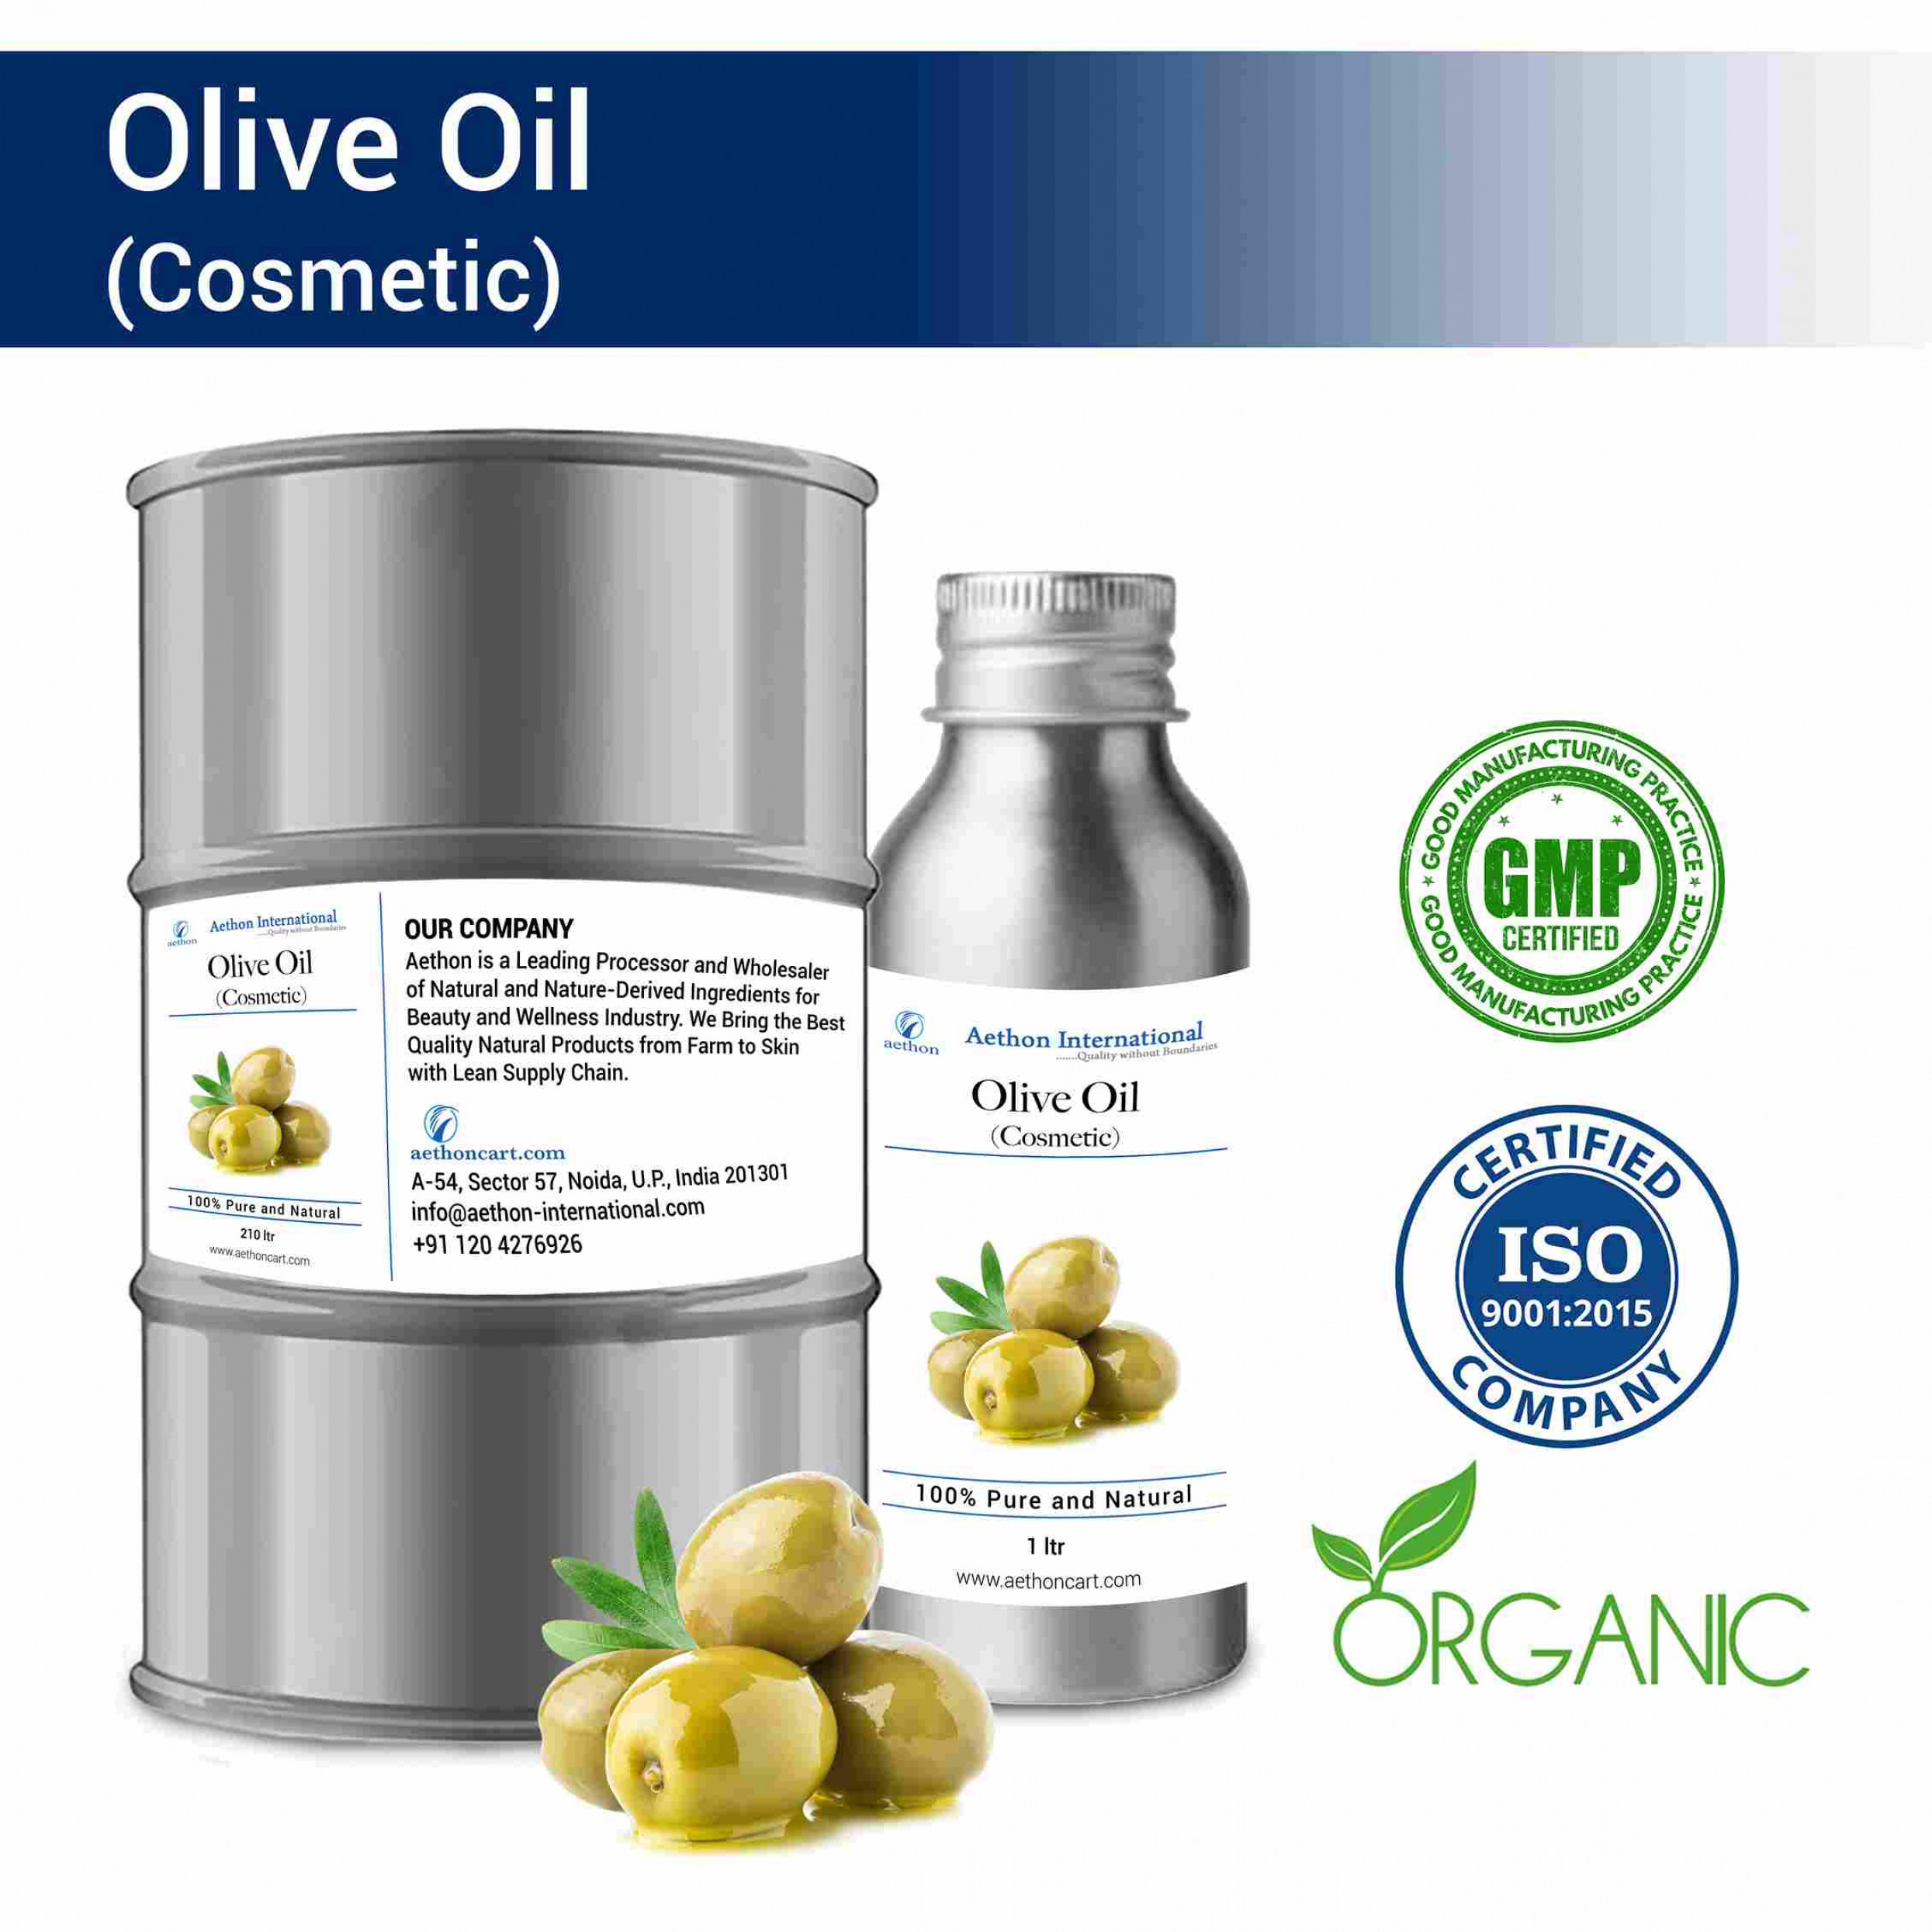 Olive Oil (Cosmetic)